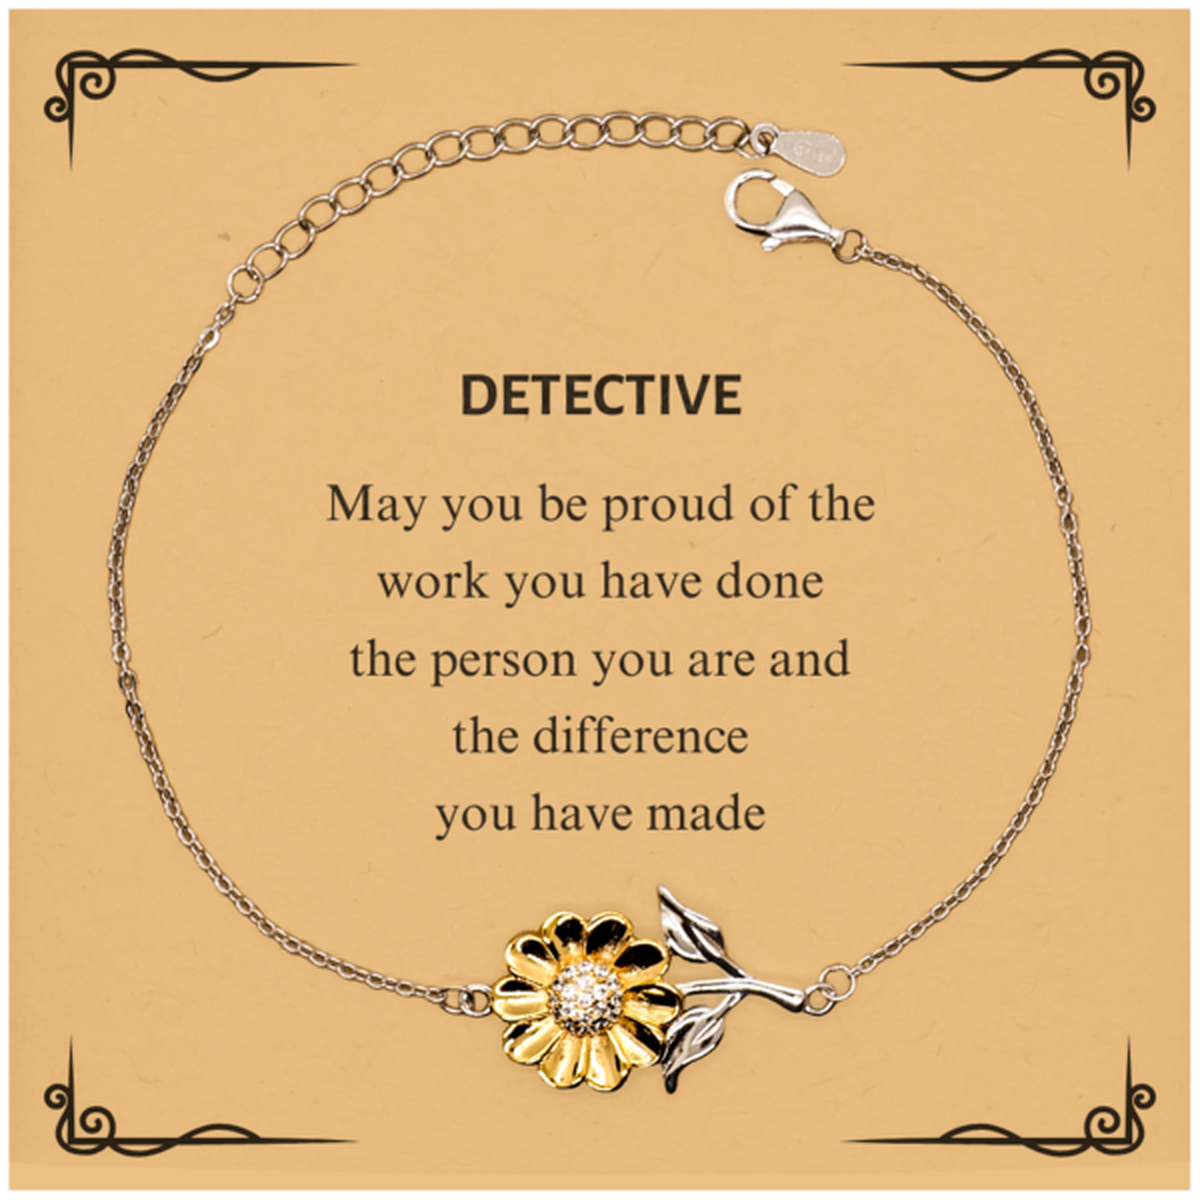 Detective May you be proud of the work you have done, Retirement Detective Sunflower Bracelet for Colleague Appreciation Gifts Amazing for Detective